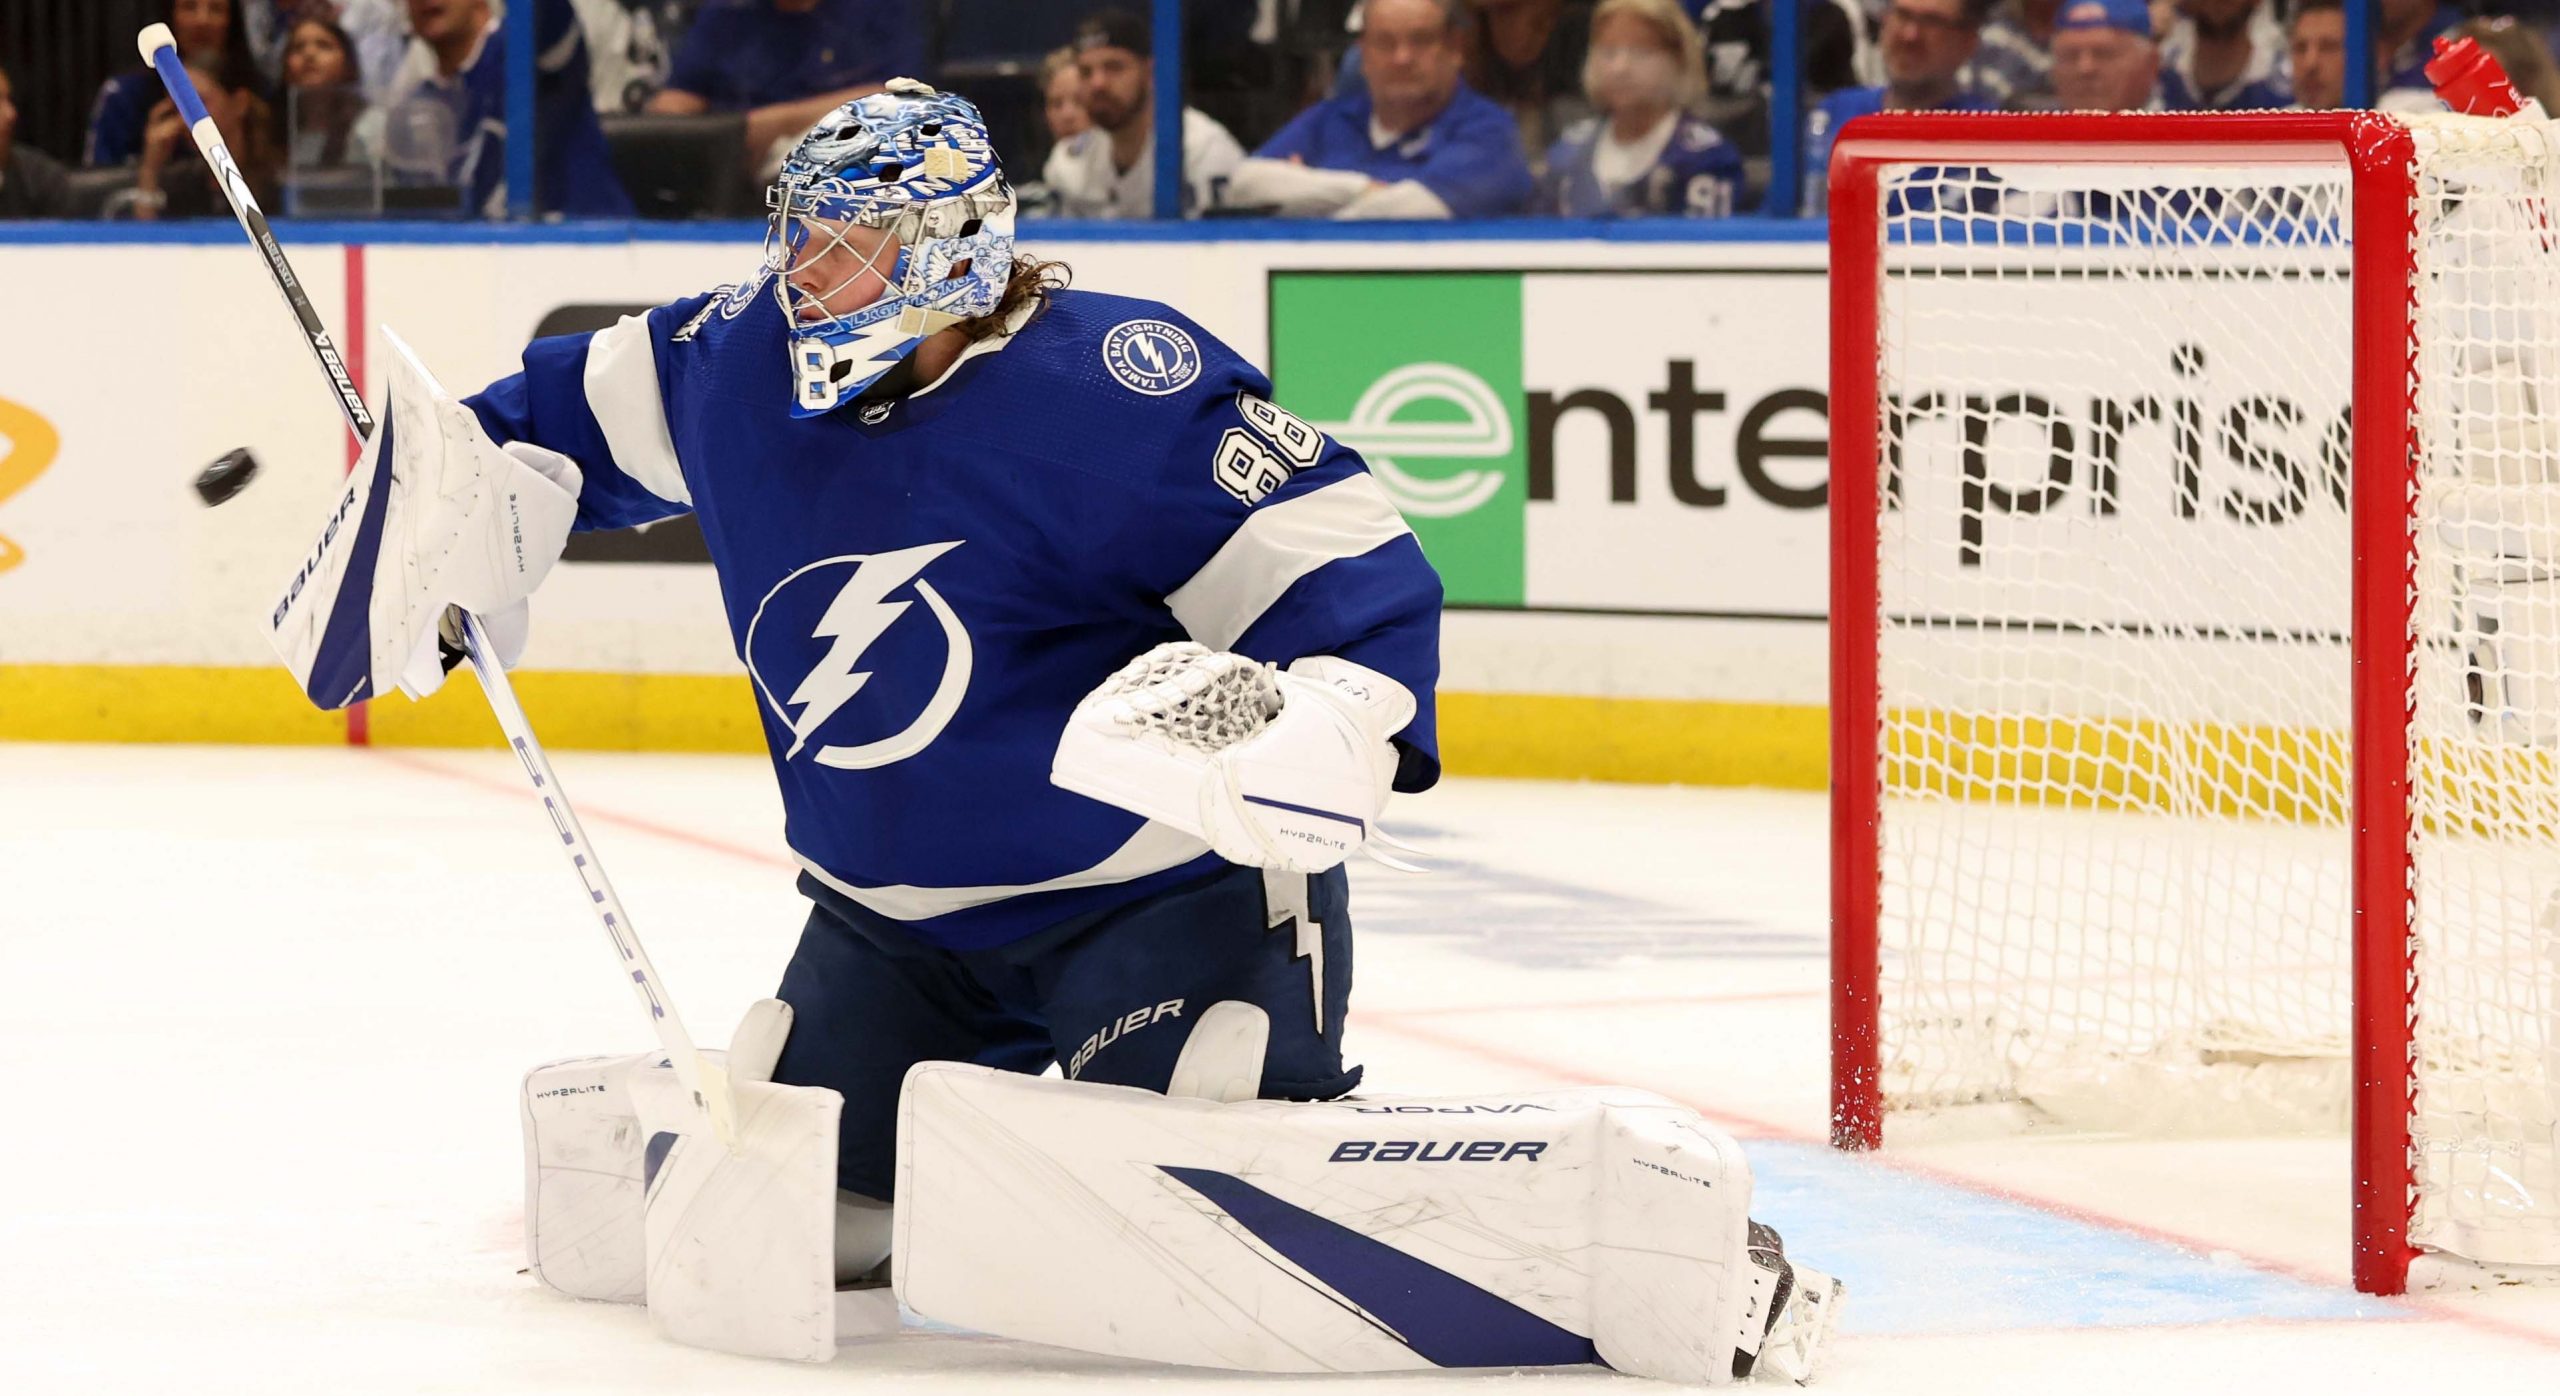 Lightning Fall Behind Panthers 3-0, End Looms - ESPN 98.1 FM - 850 AM WRUF